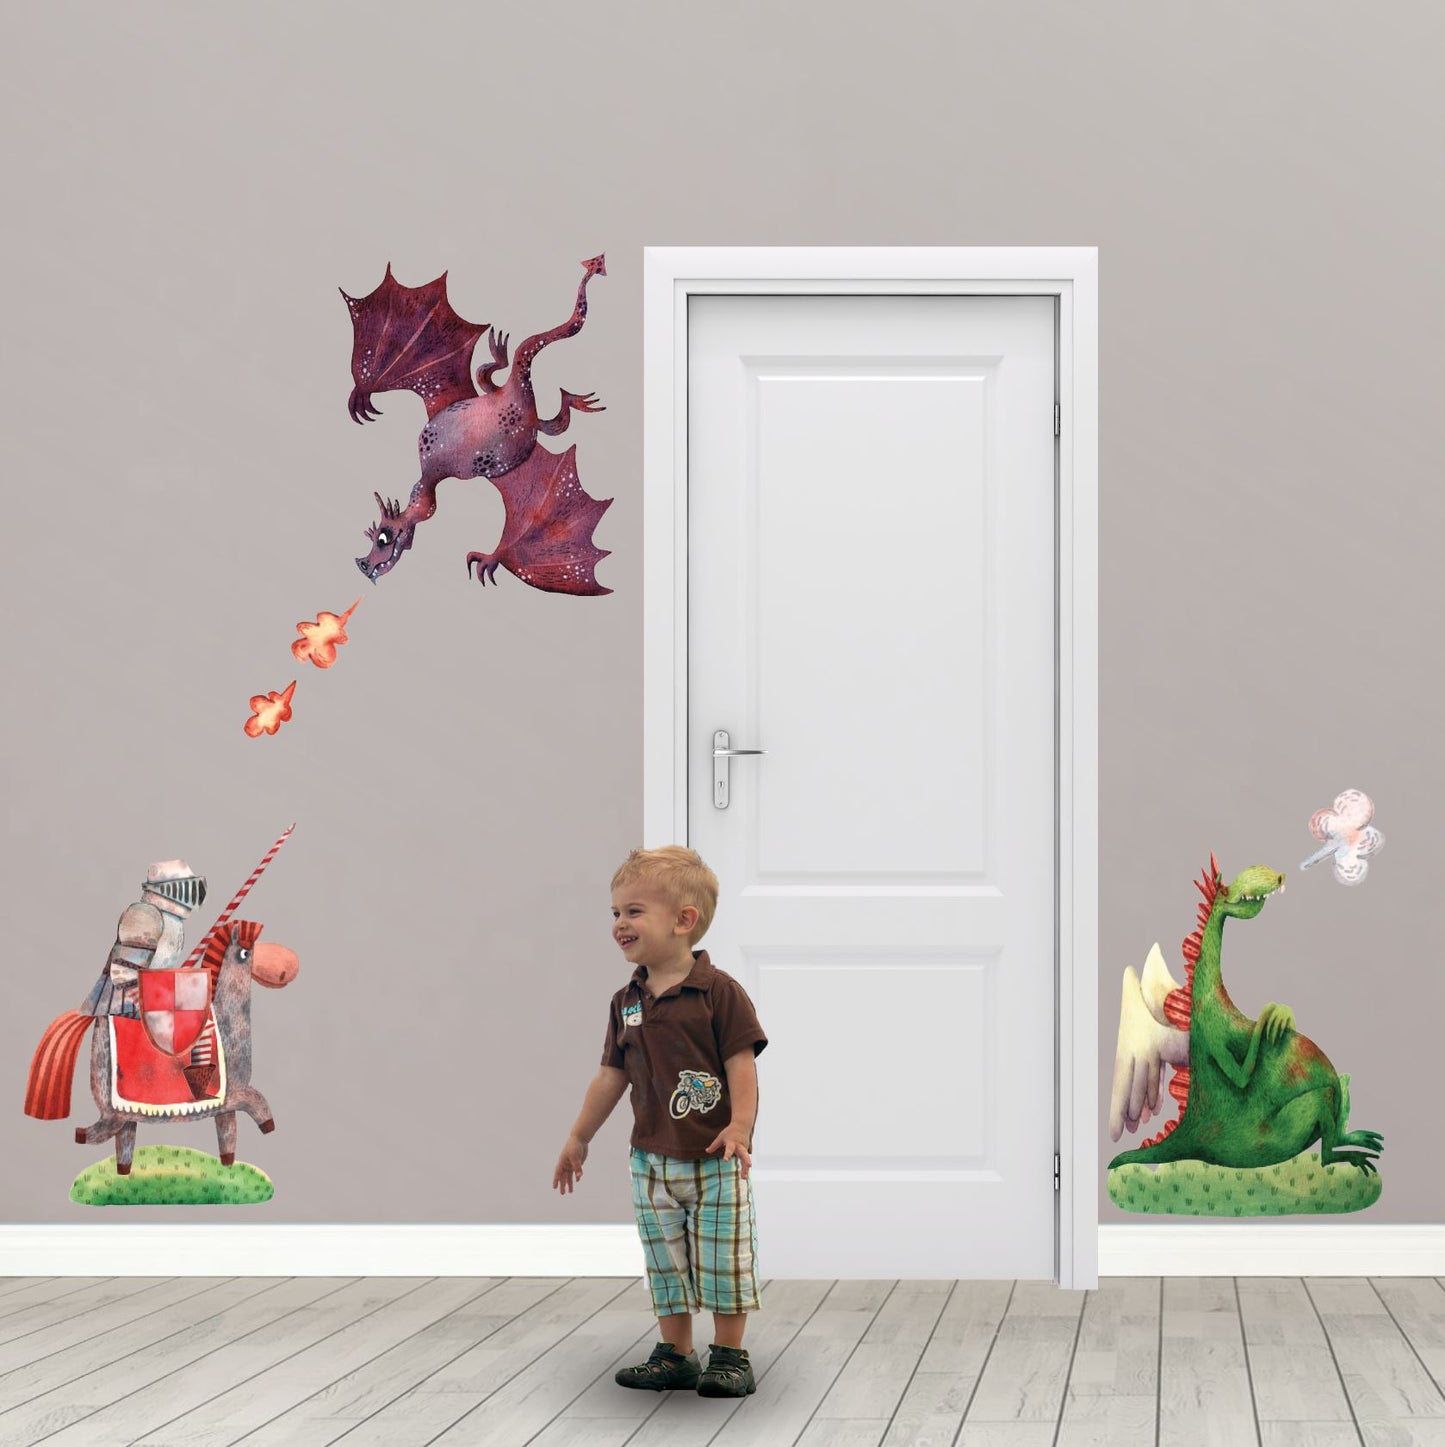 Castle and Dragons Wall Stickers | Door Decoration Wall Decals - wall decals - Picture Perfect Decals